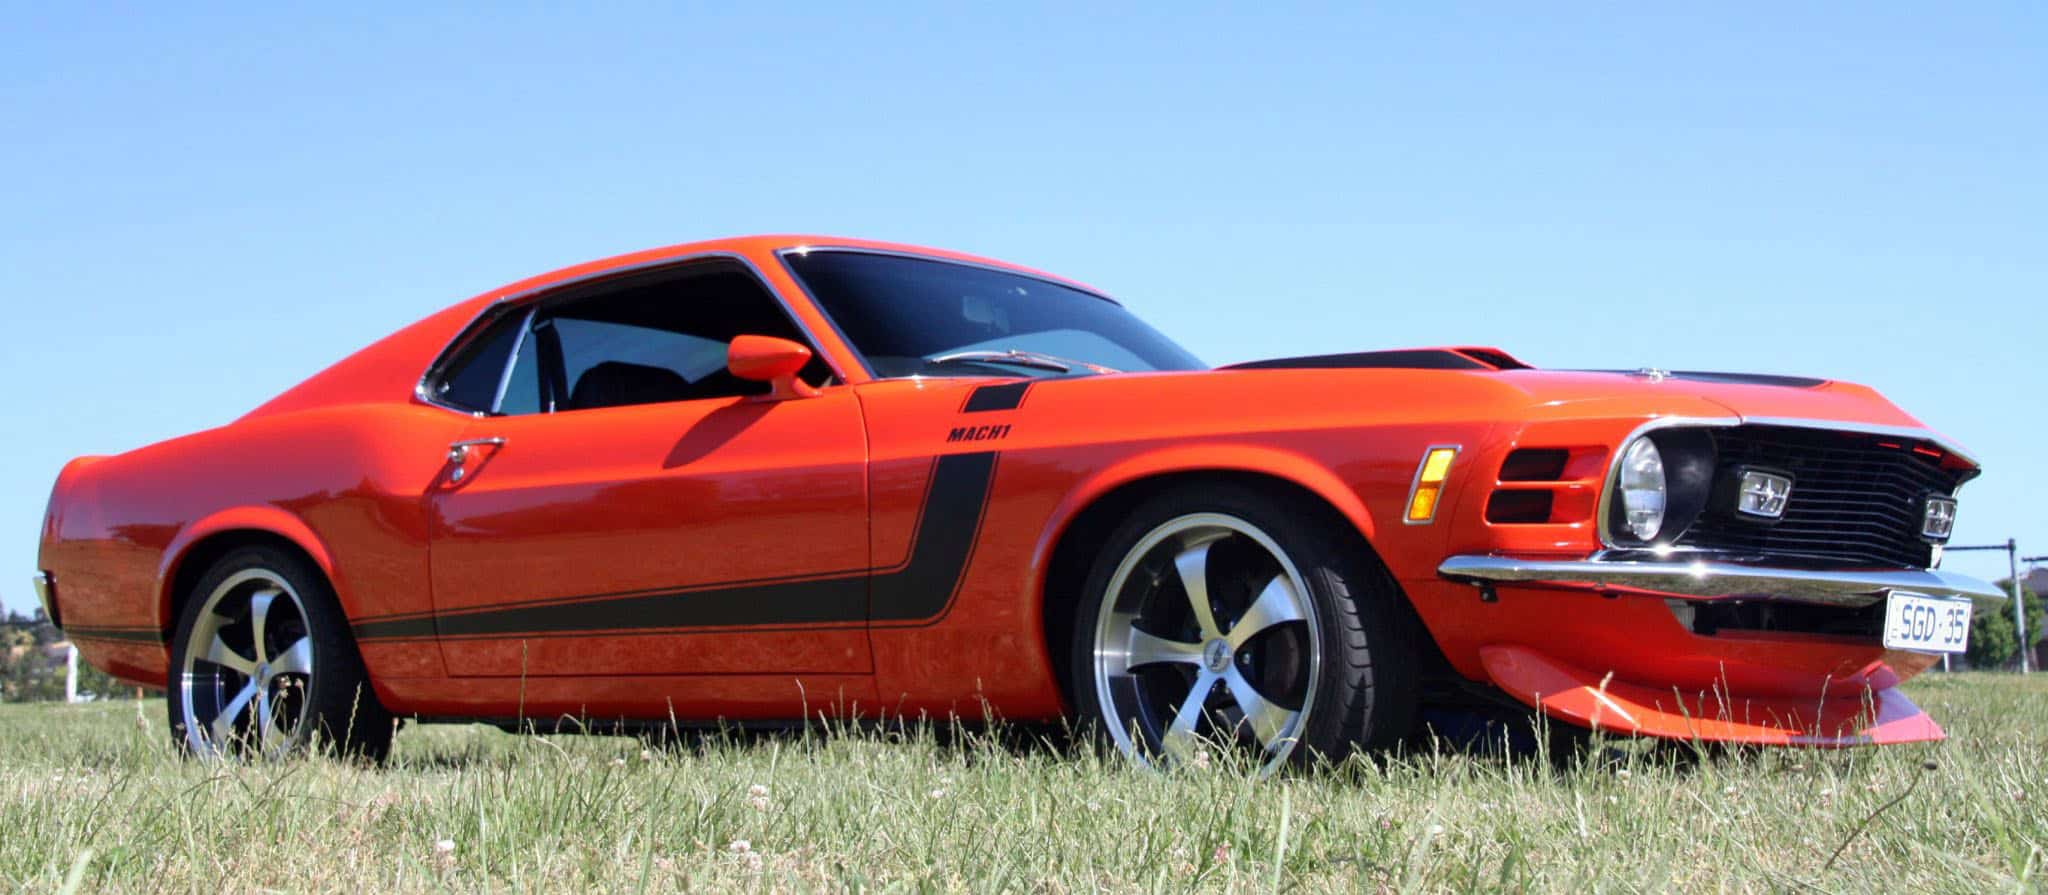 orange ford mach1 mustang limo hire